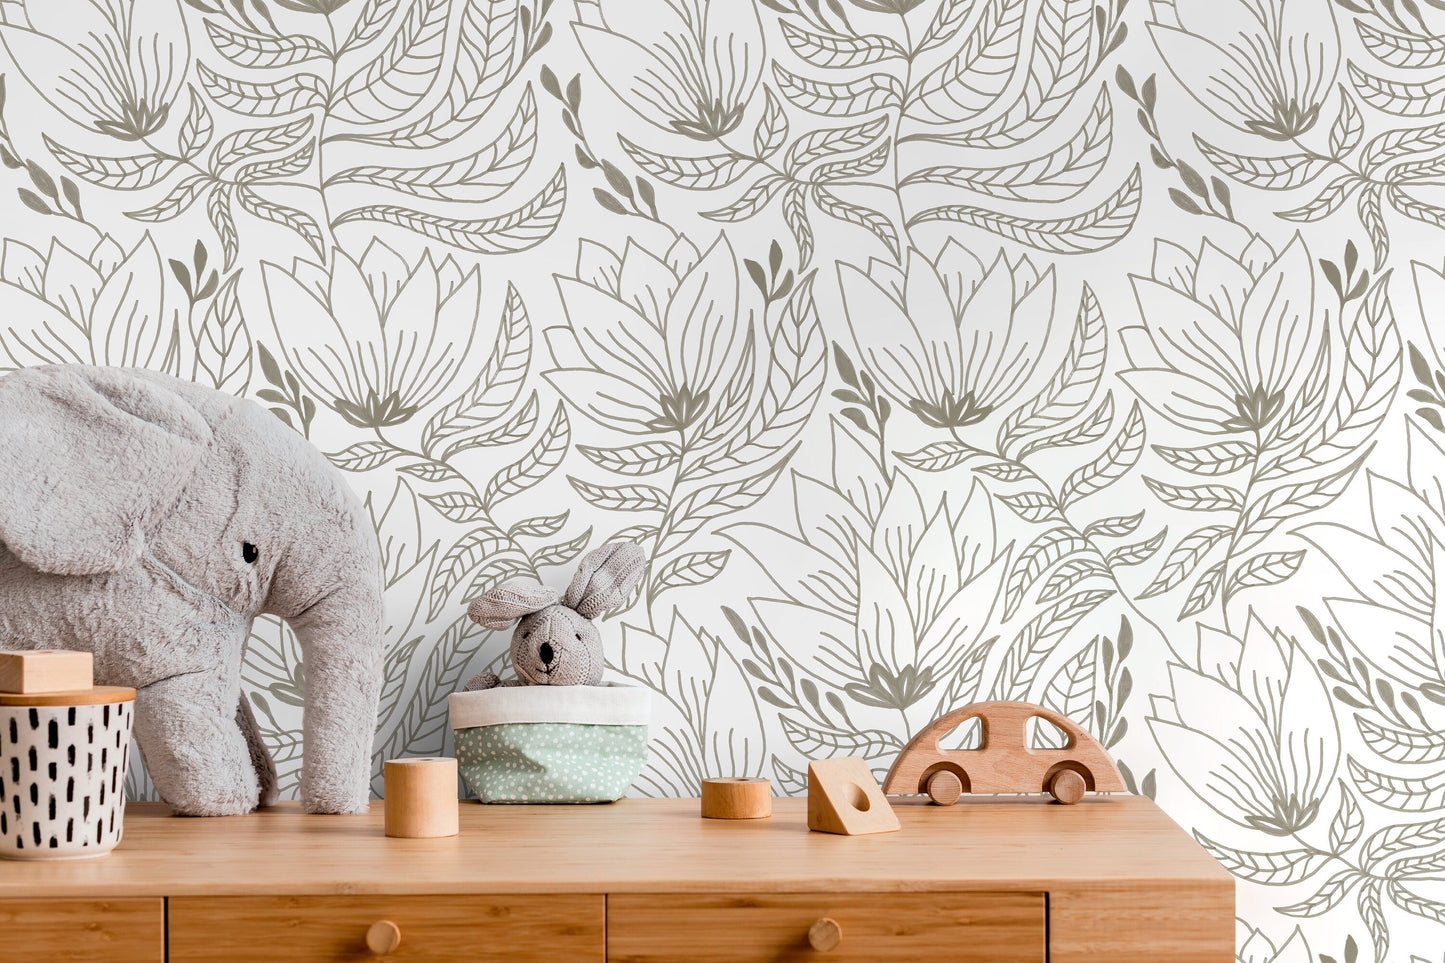 Floral and Leaf Boho Wallpaper / Peel and Stick Wallpaper Removable Wallpaper Home Decor Wall Art Wall Decor Room Decor - C941